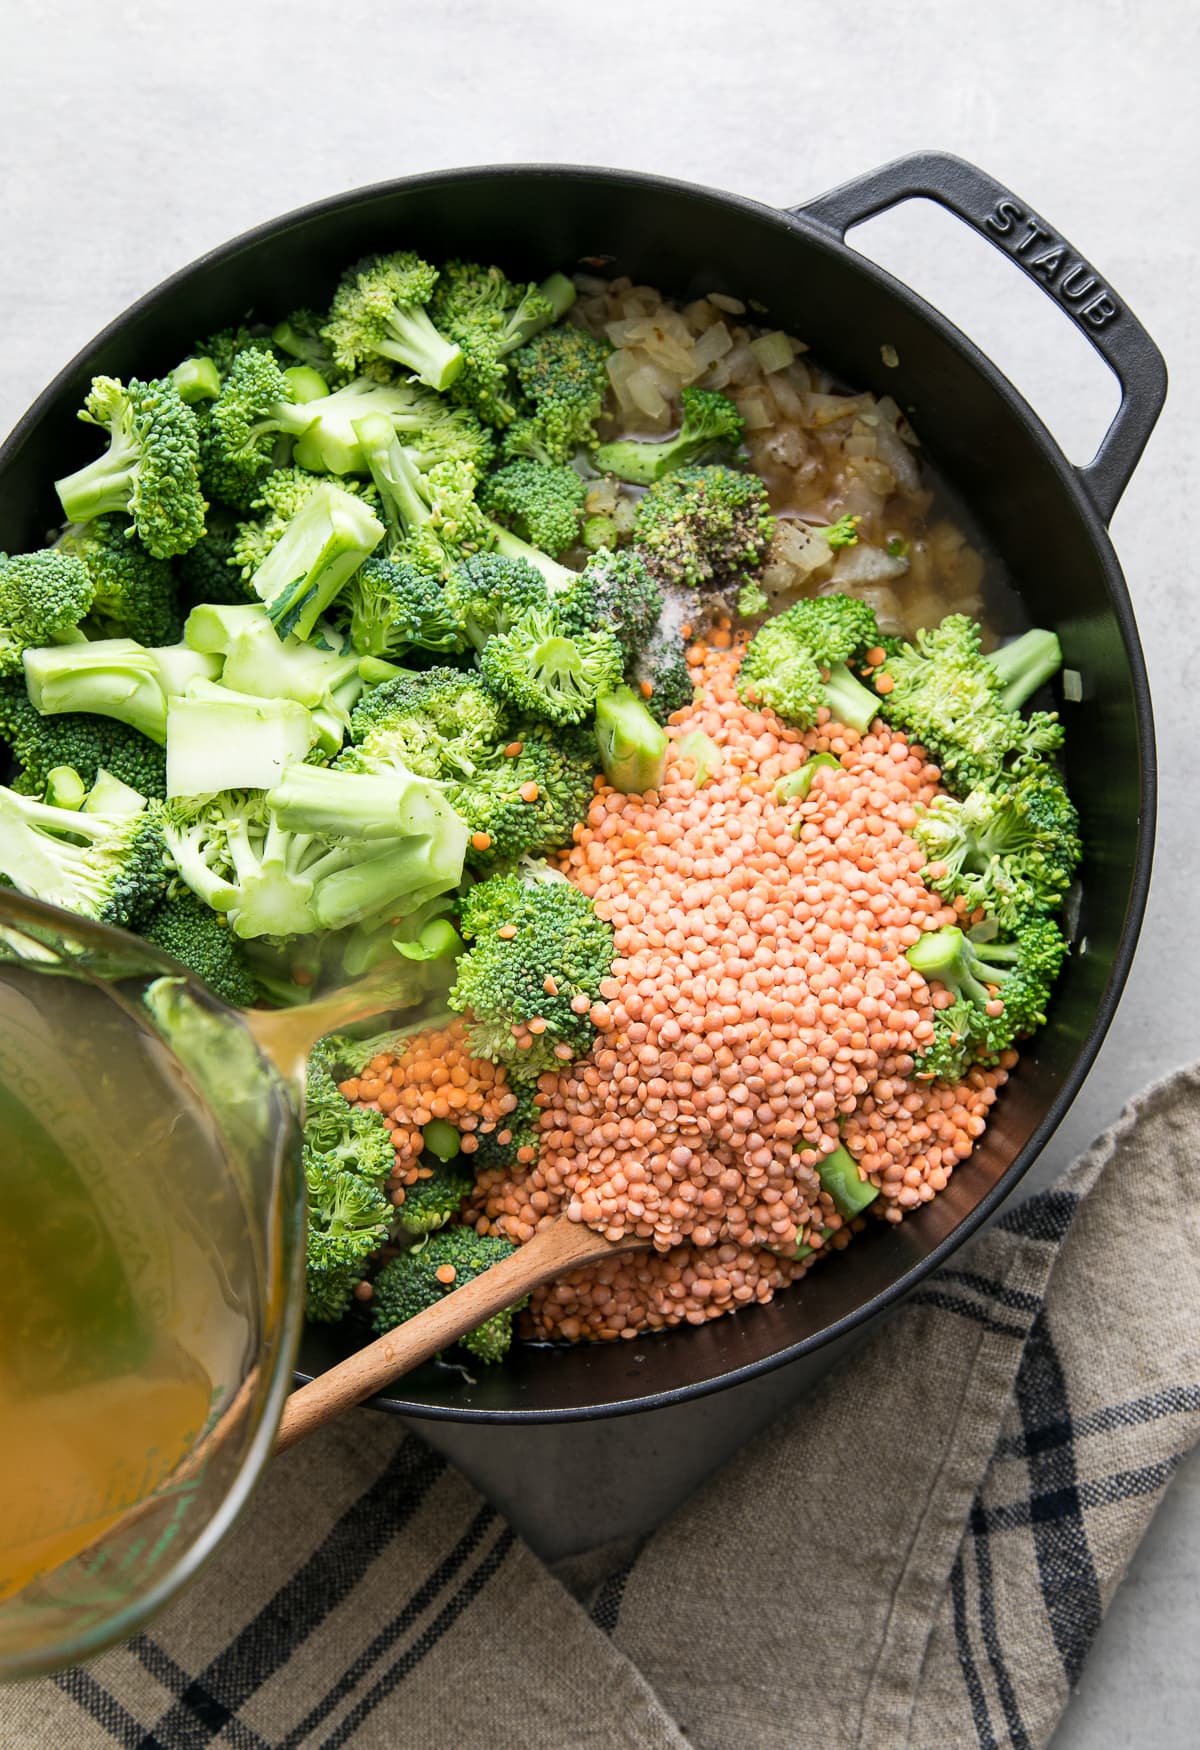 top down view showing the process of adding vegetable broth to pot filled with broccoli red lentil ingredients.